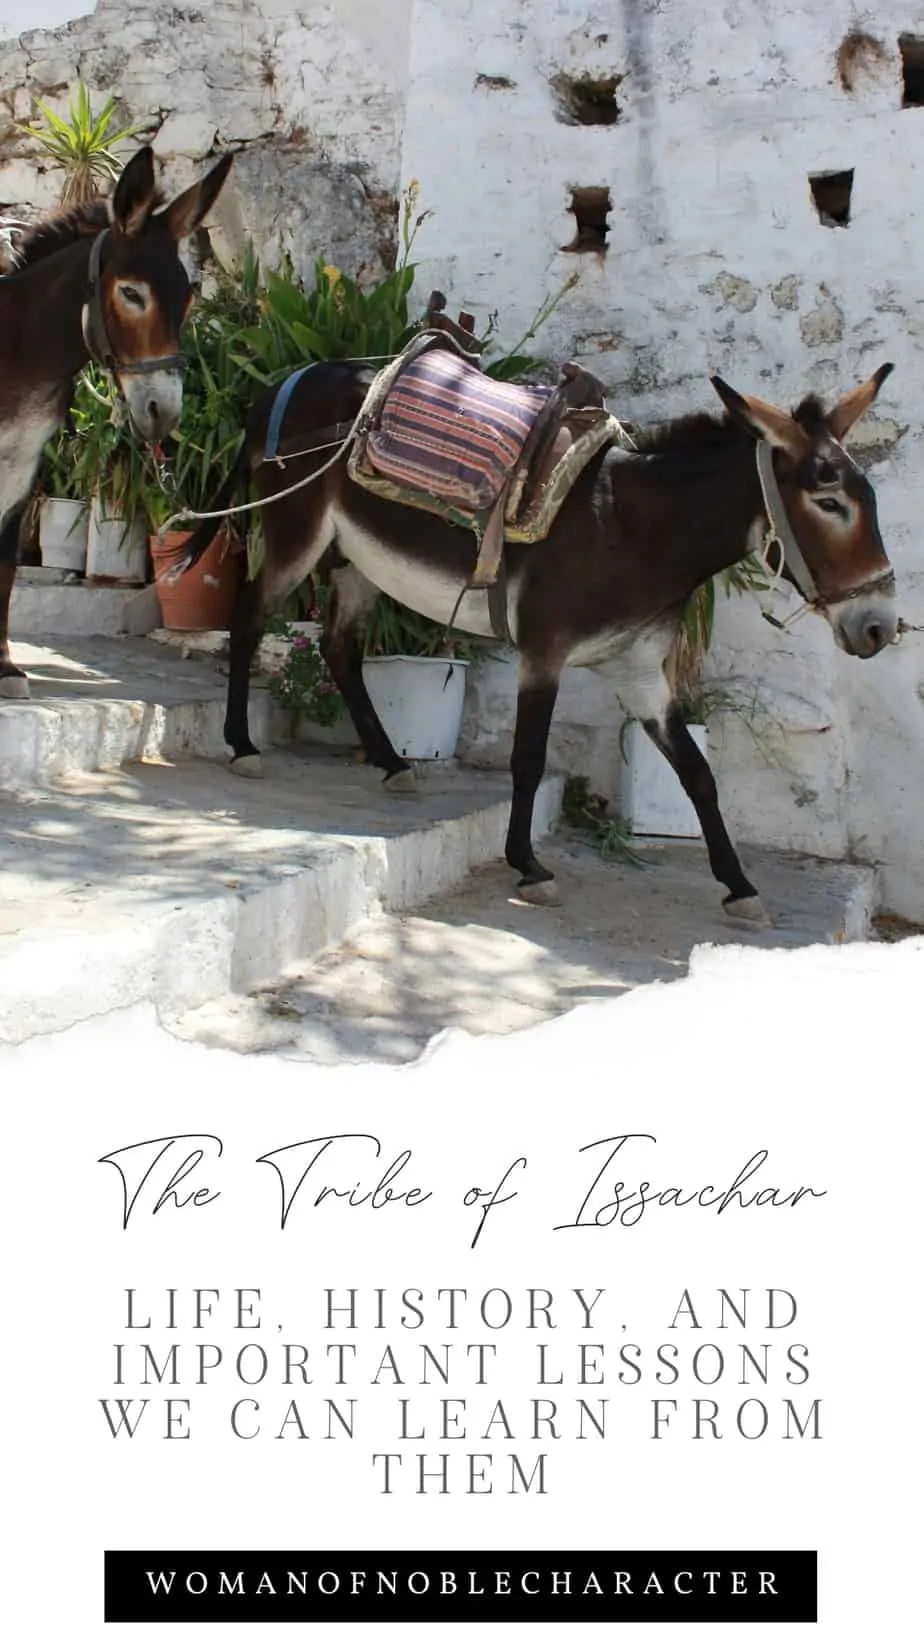 donkey with text that says, "The Tribe of Issachar - Life, History, and Important Lessons We Can Learn From Them" 